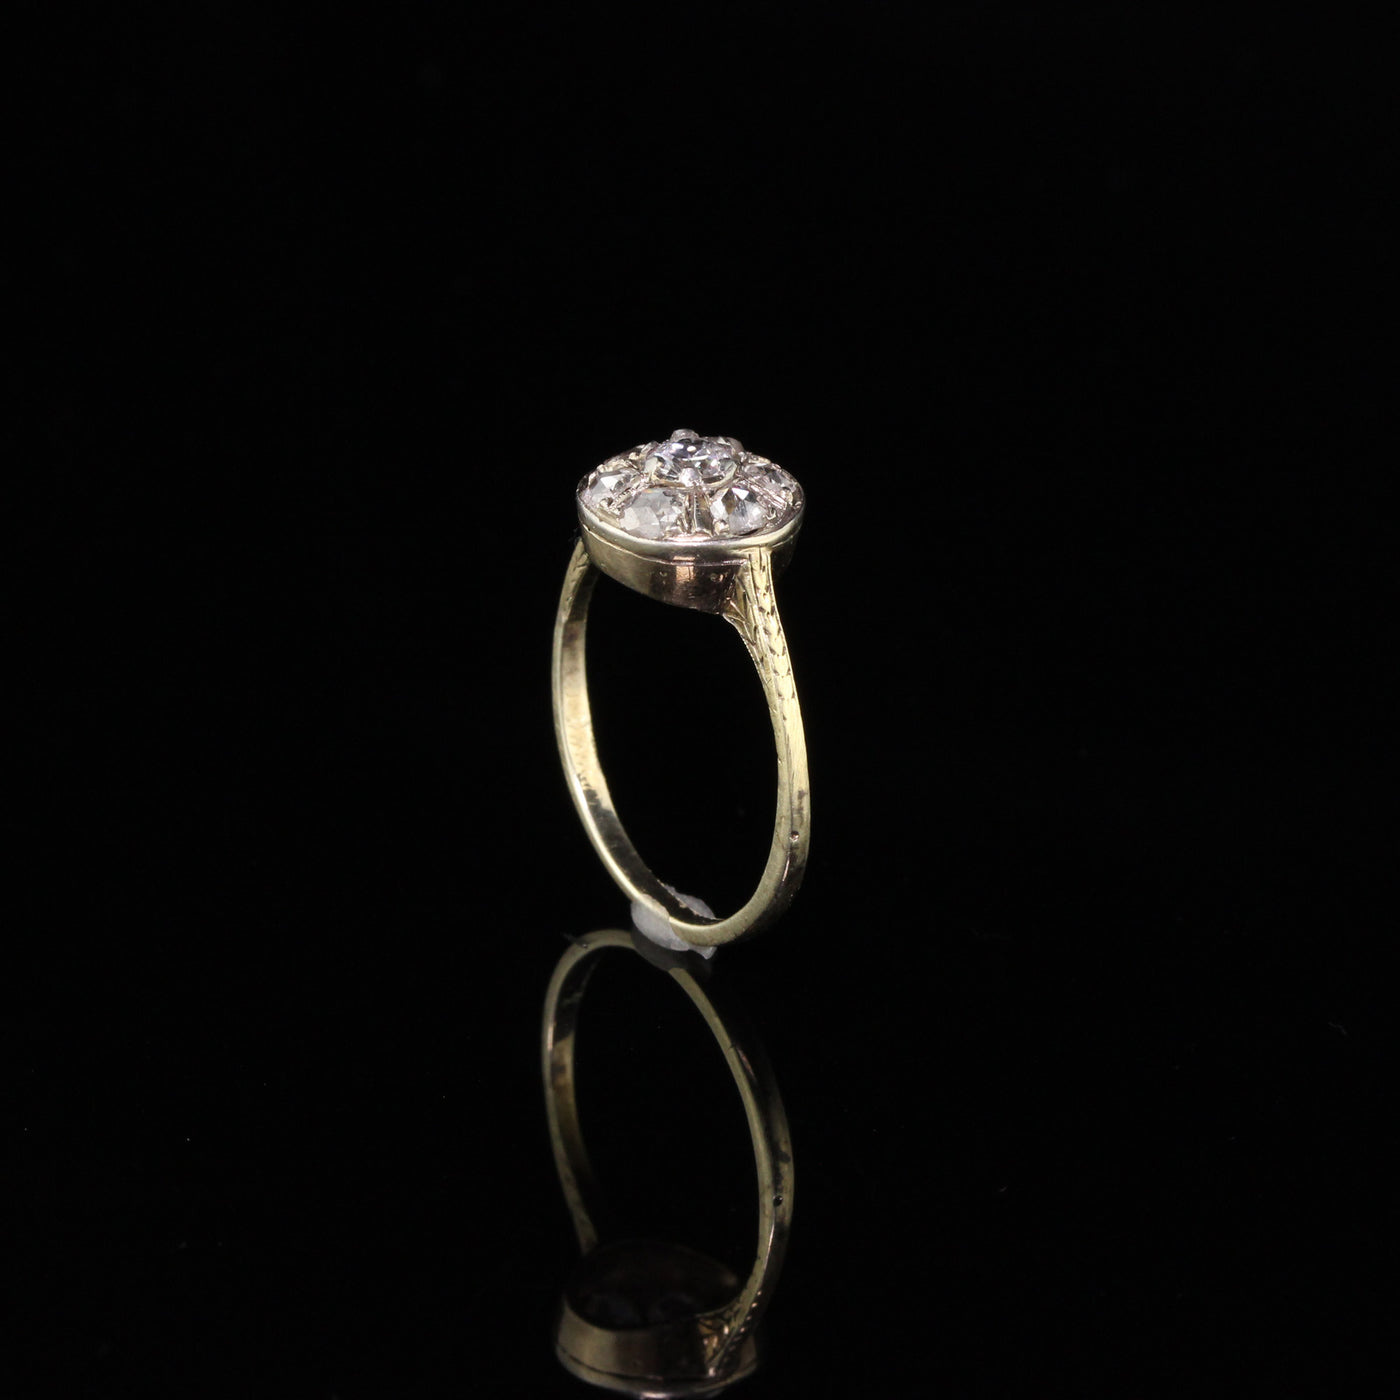 Antique Victorian 10K Yellow Gold Old Euro and Rose Cut Diamond Engagement Ring